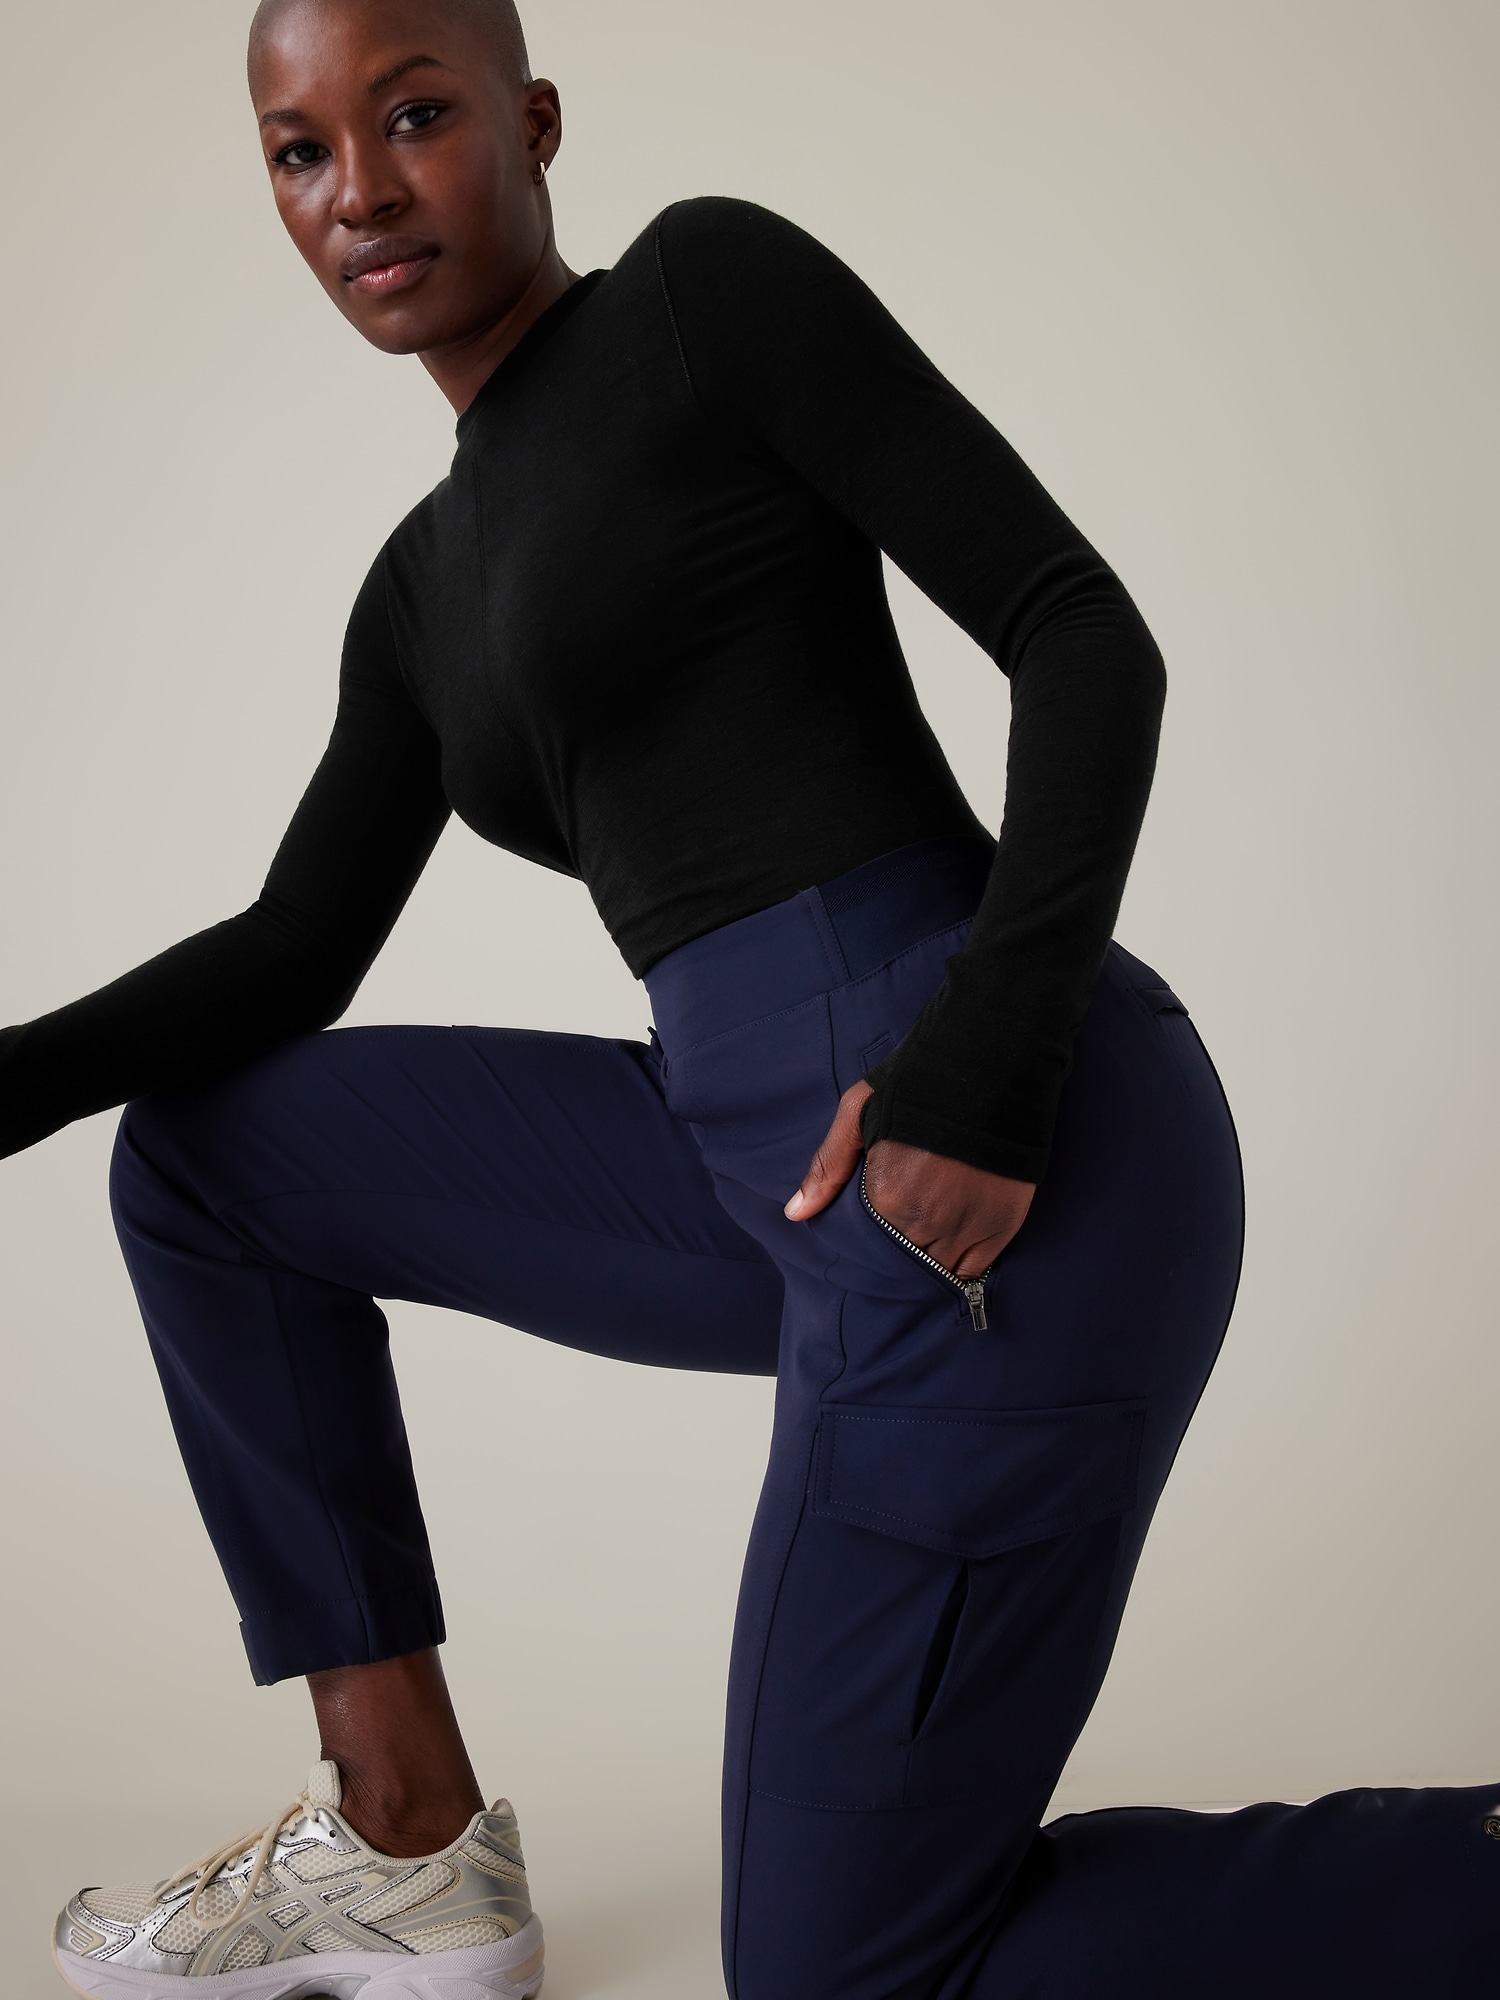 Cargo Leggings, Shop The Largest Collection